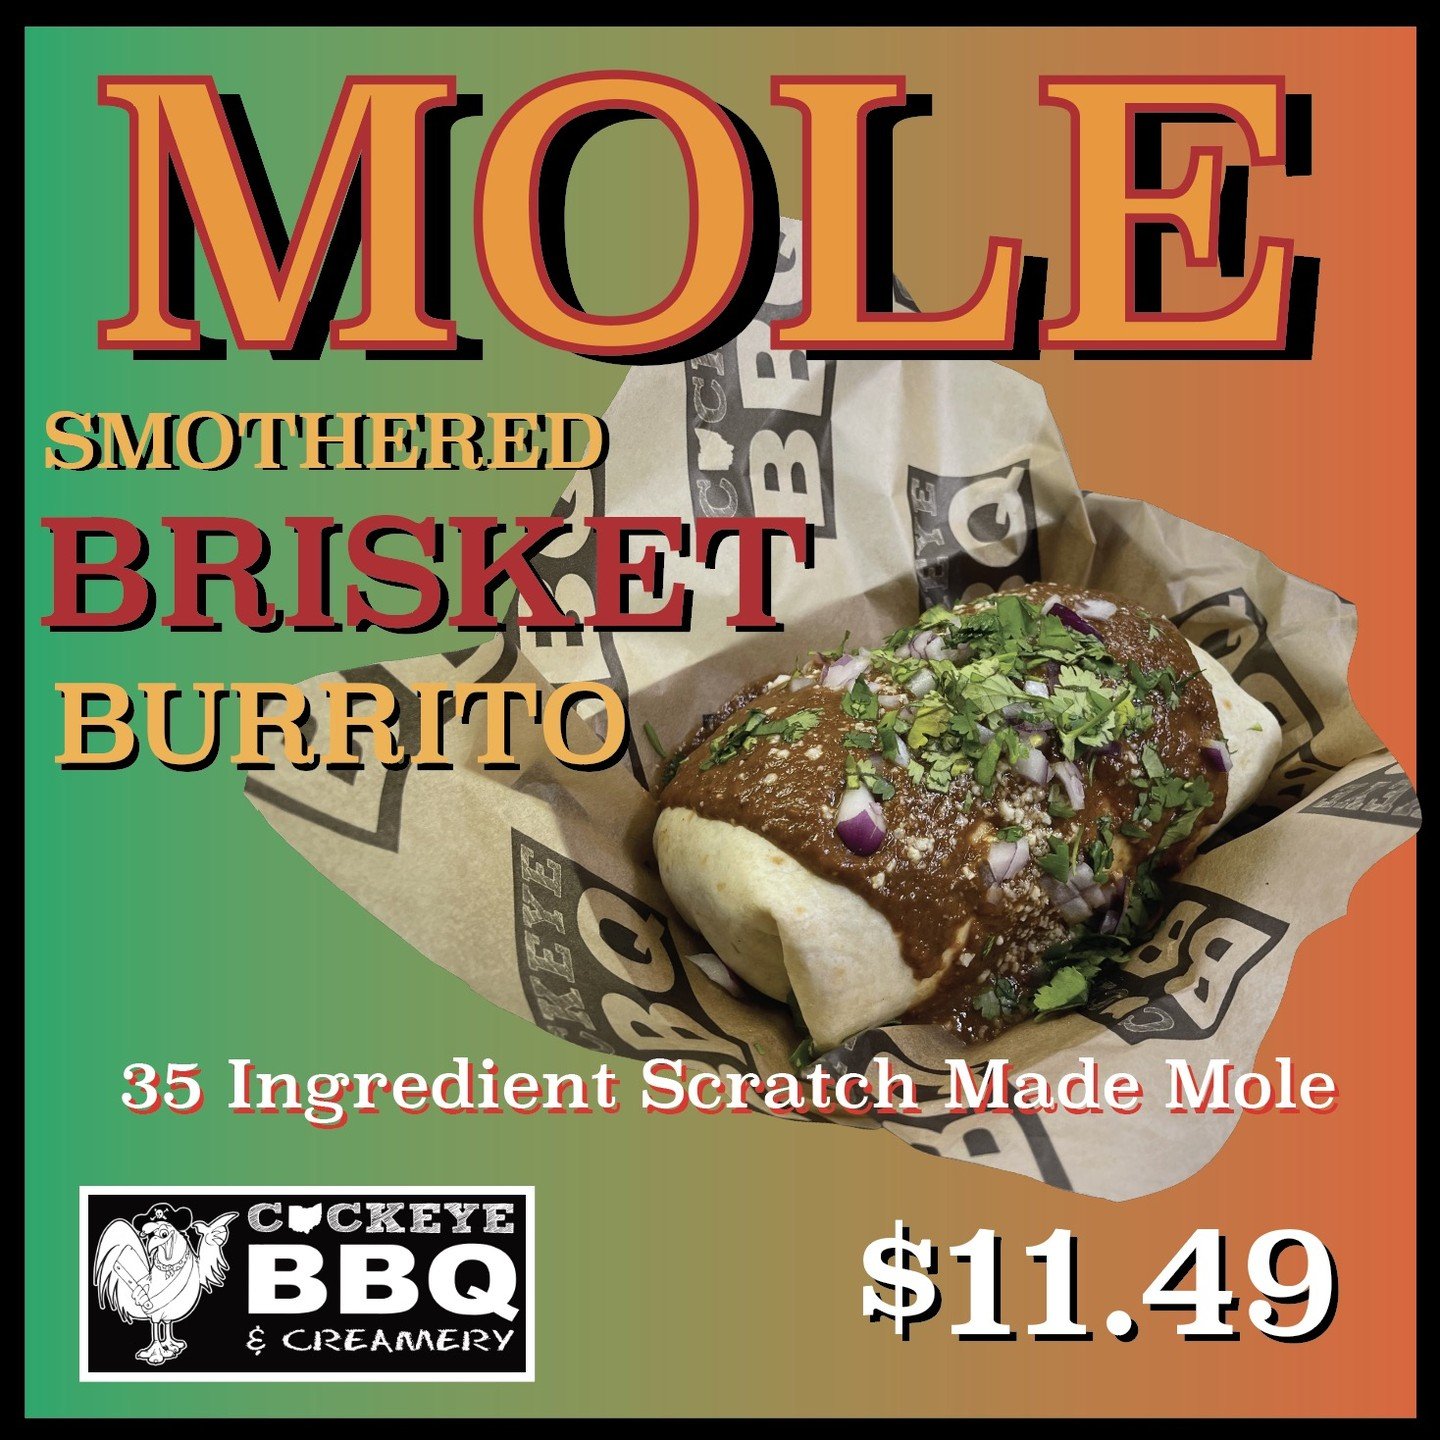 HOLY MOLE-Y! New Special Up for Cinco De Mayo!
MOLE SMOTHERED BRISKET BURRITO - 12 inch Flour Tortilla with Chopped Brisket, Mexican Red Rice, Fire Roasted Peppers and Onions, and Cheddar &amp; Pepperjack Cheeses. Smothered in our Scratch-Made 35 Ing